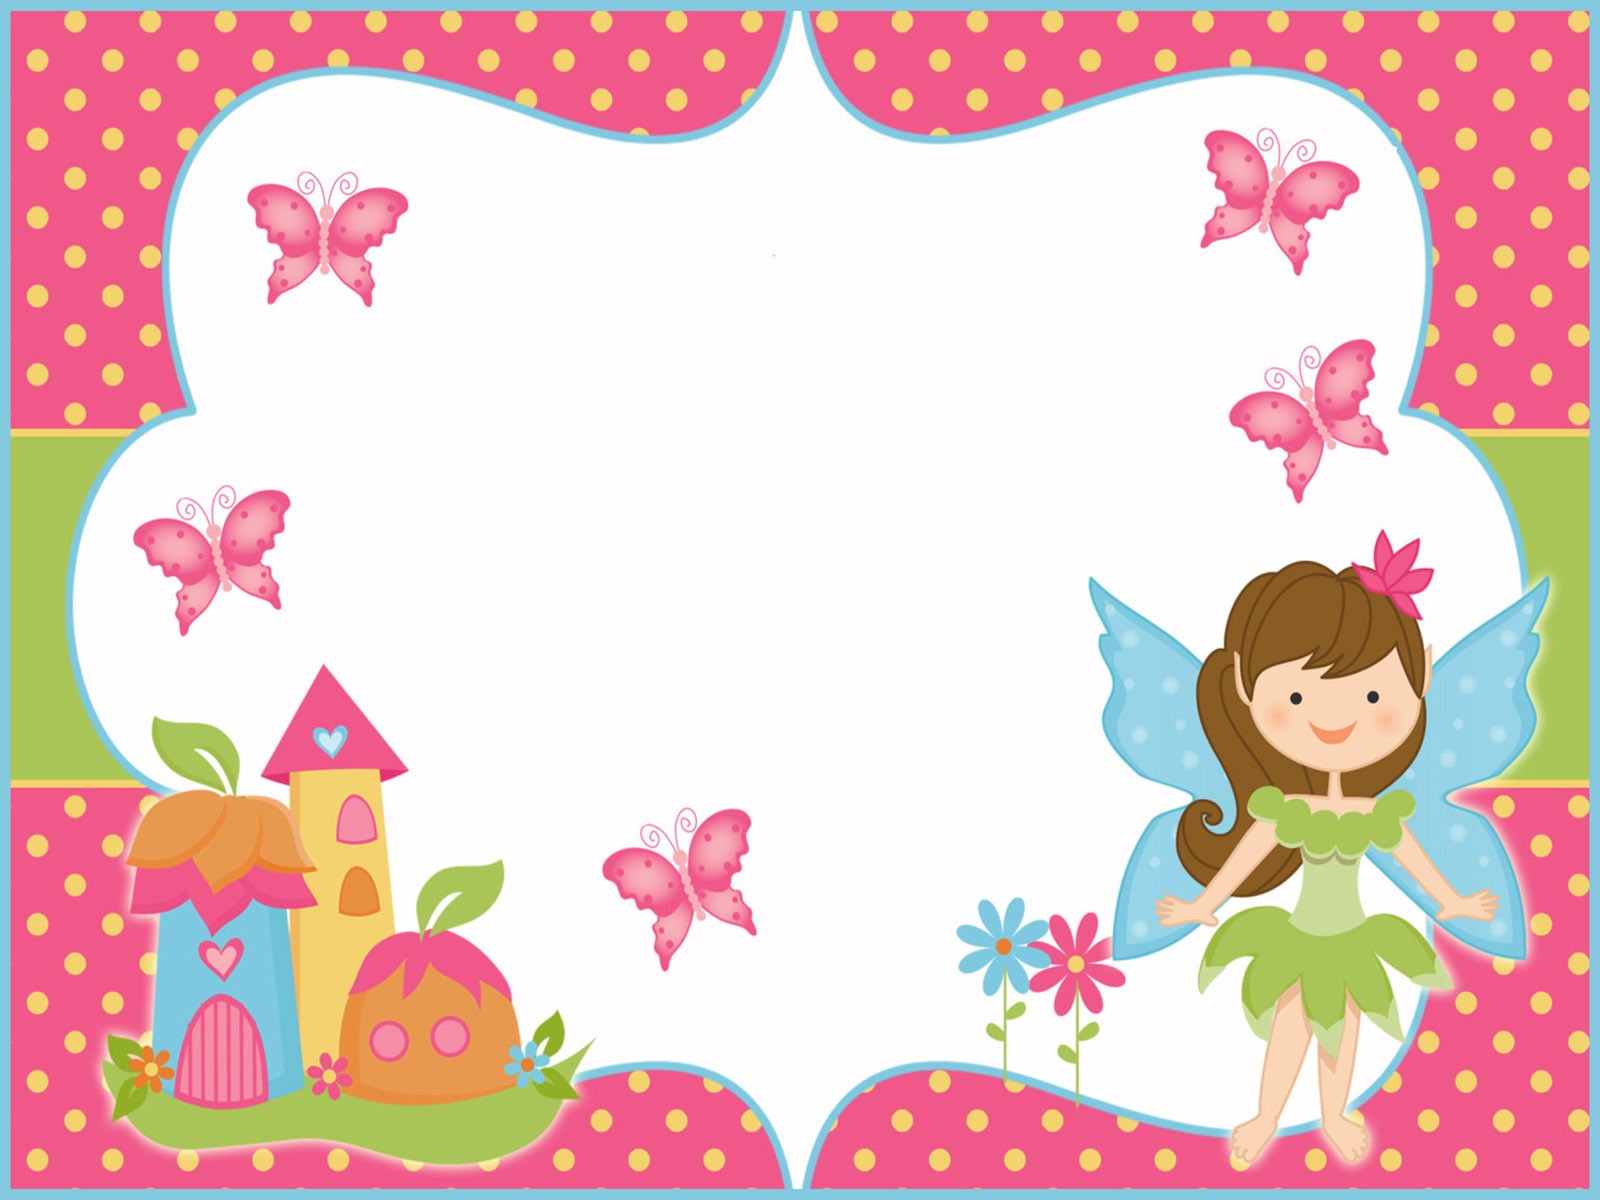 Butterfly Party Invitation Ideas and Free Invitation Templates